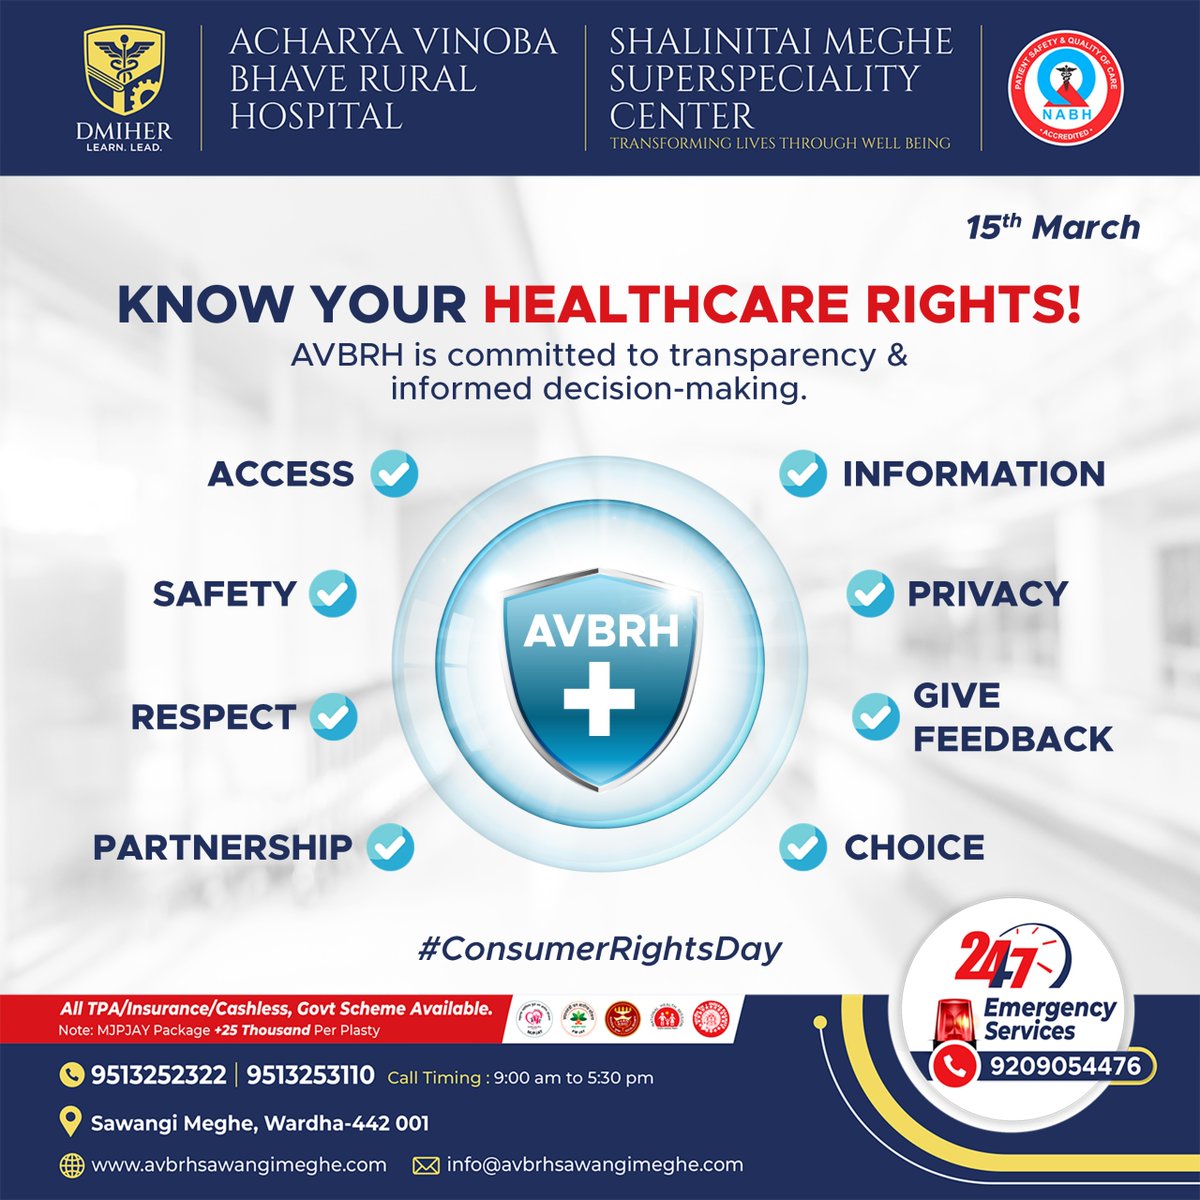 Happy Consumer Rights Day! At AVBRH & SMSC, we're proud to honor your rights as a patient every single day. Join us in celebrating #PatientRights and advocating for a healthcare system that puts you first.

#ConsumerRightsDay #HealthcareEquality #QualityCare #EmpoweredPatients